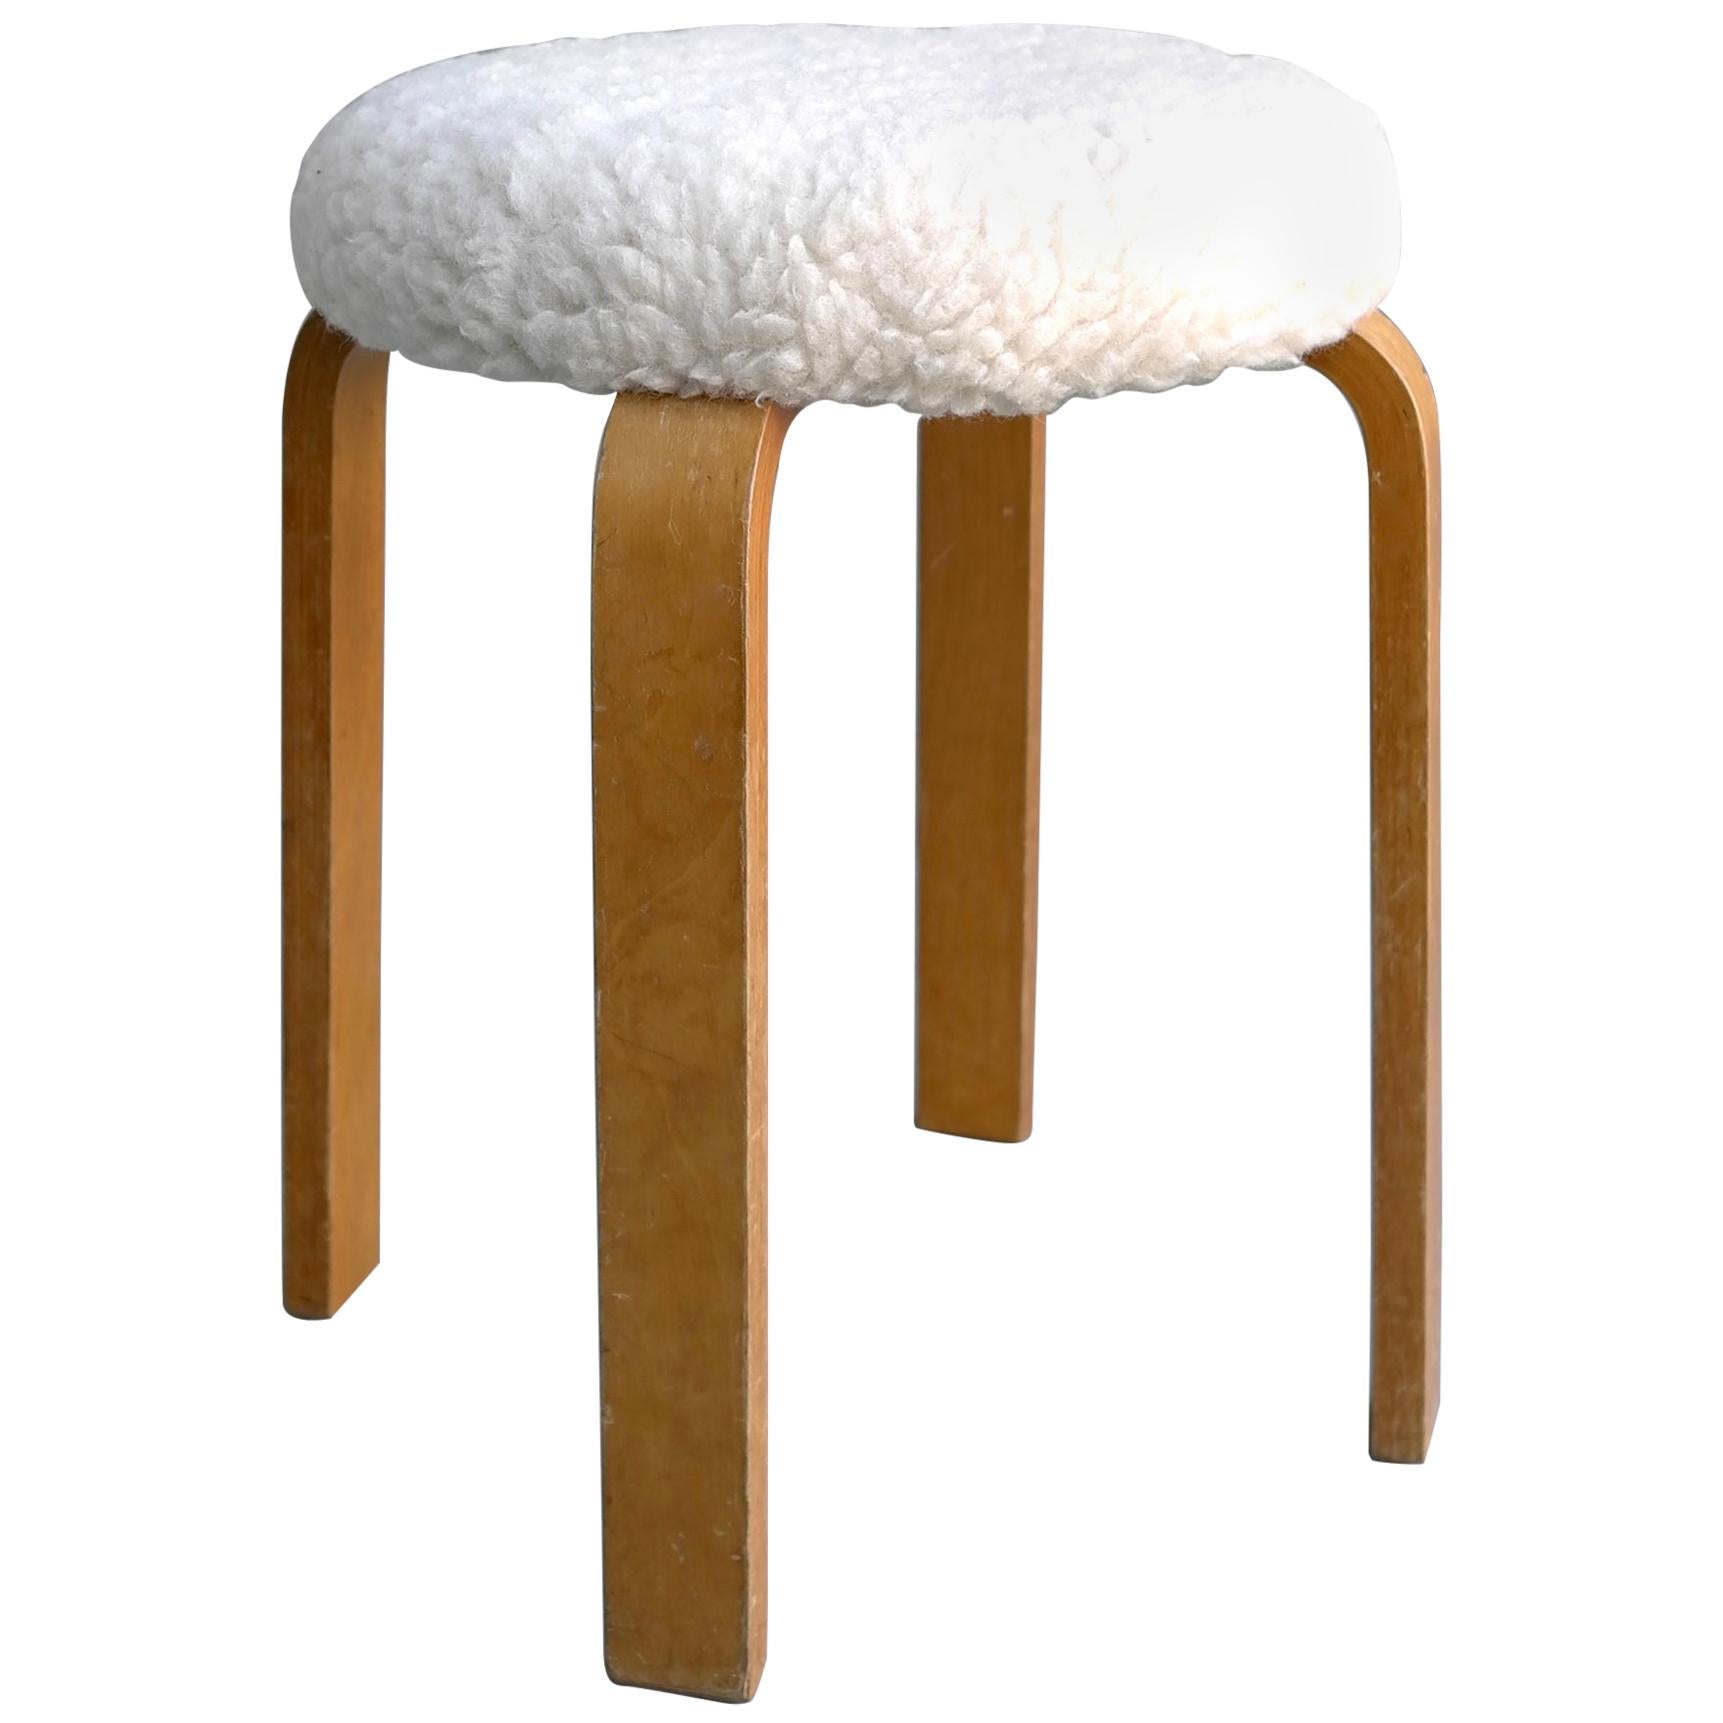 Merino Wool and Birch Plywood Stool by Cor Alons for Gouda Den Boer, 1955